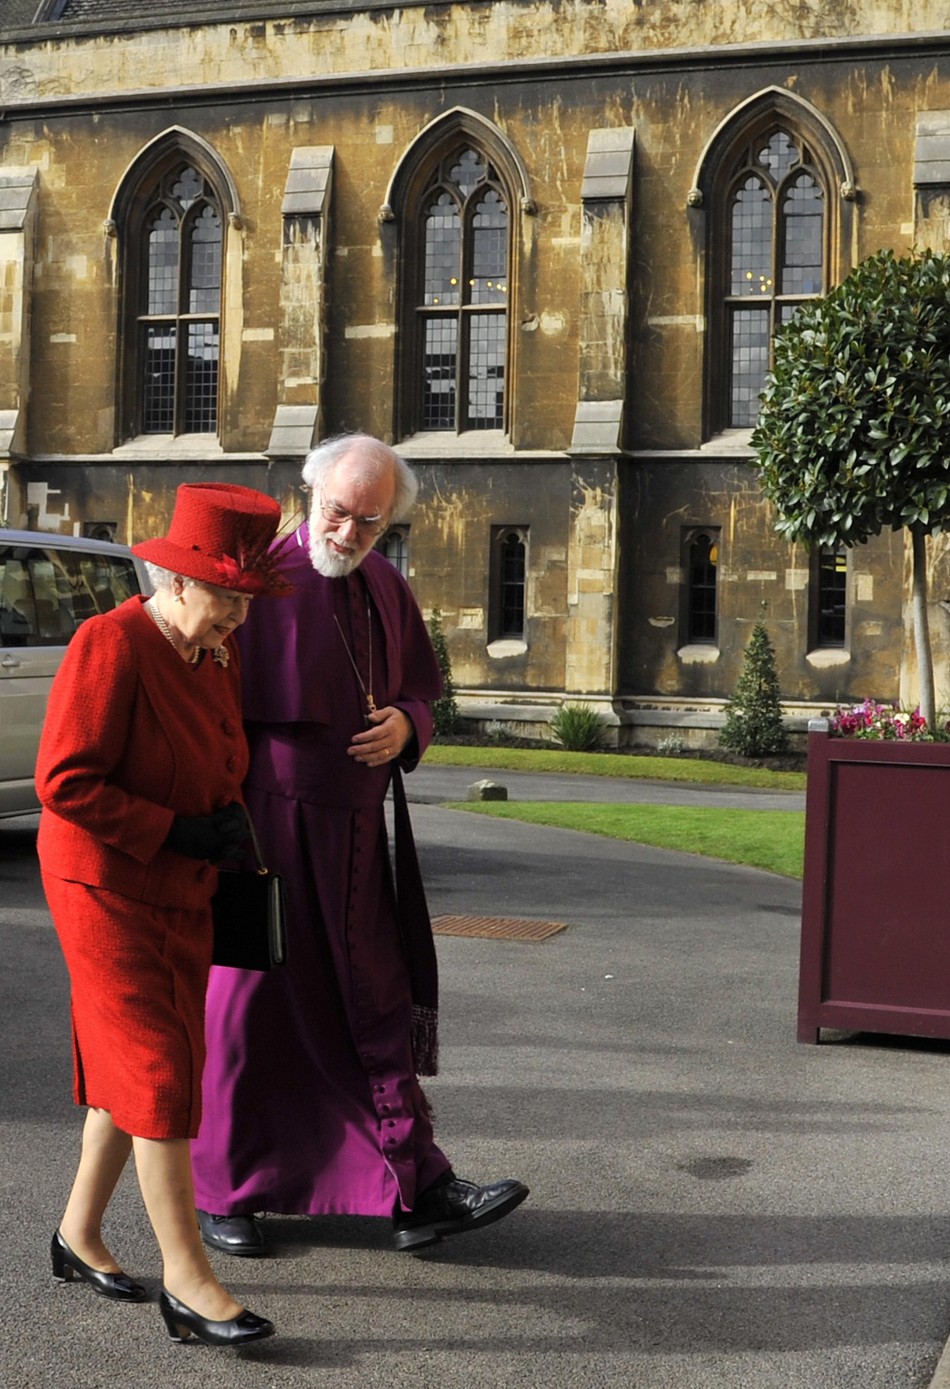 The concept of our established Church is occasionally misunderstood says Queen Elizabeth